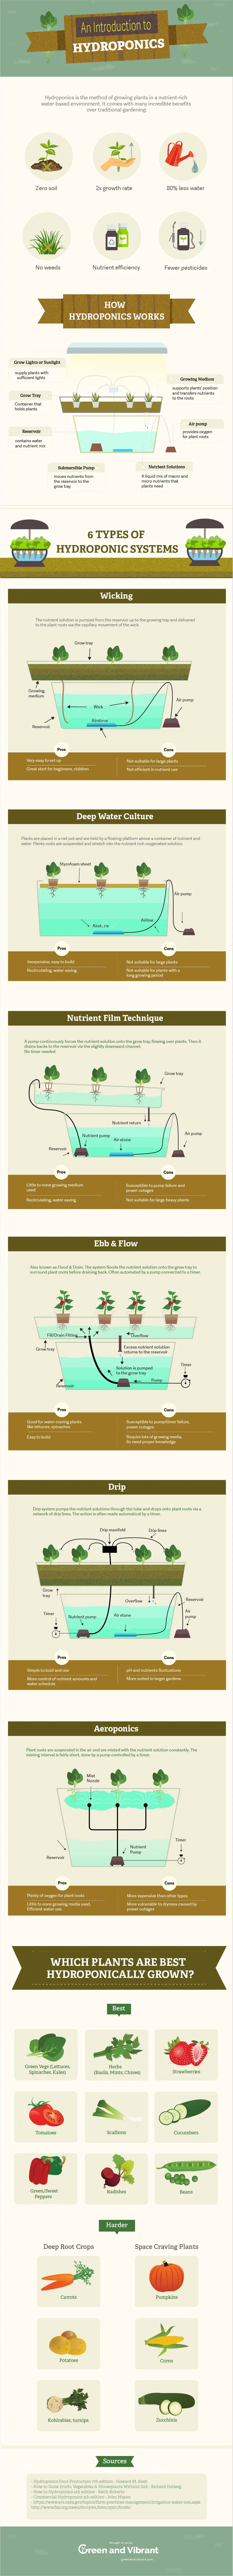 introduction-to-hydroponics-the-beginners-guide-infographic